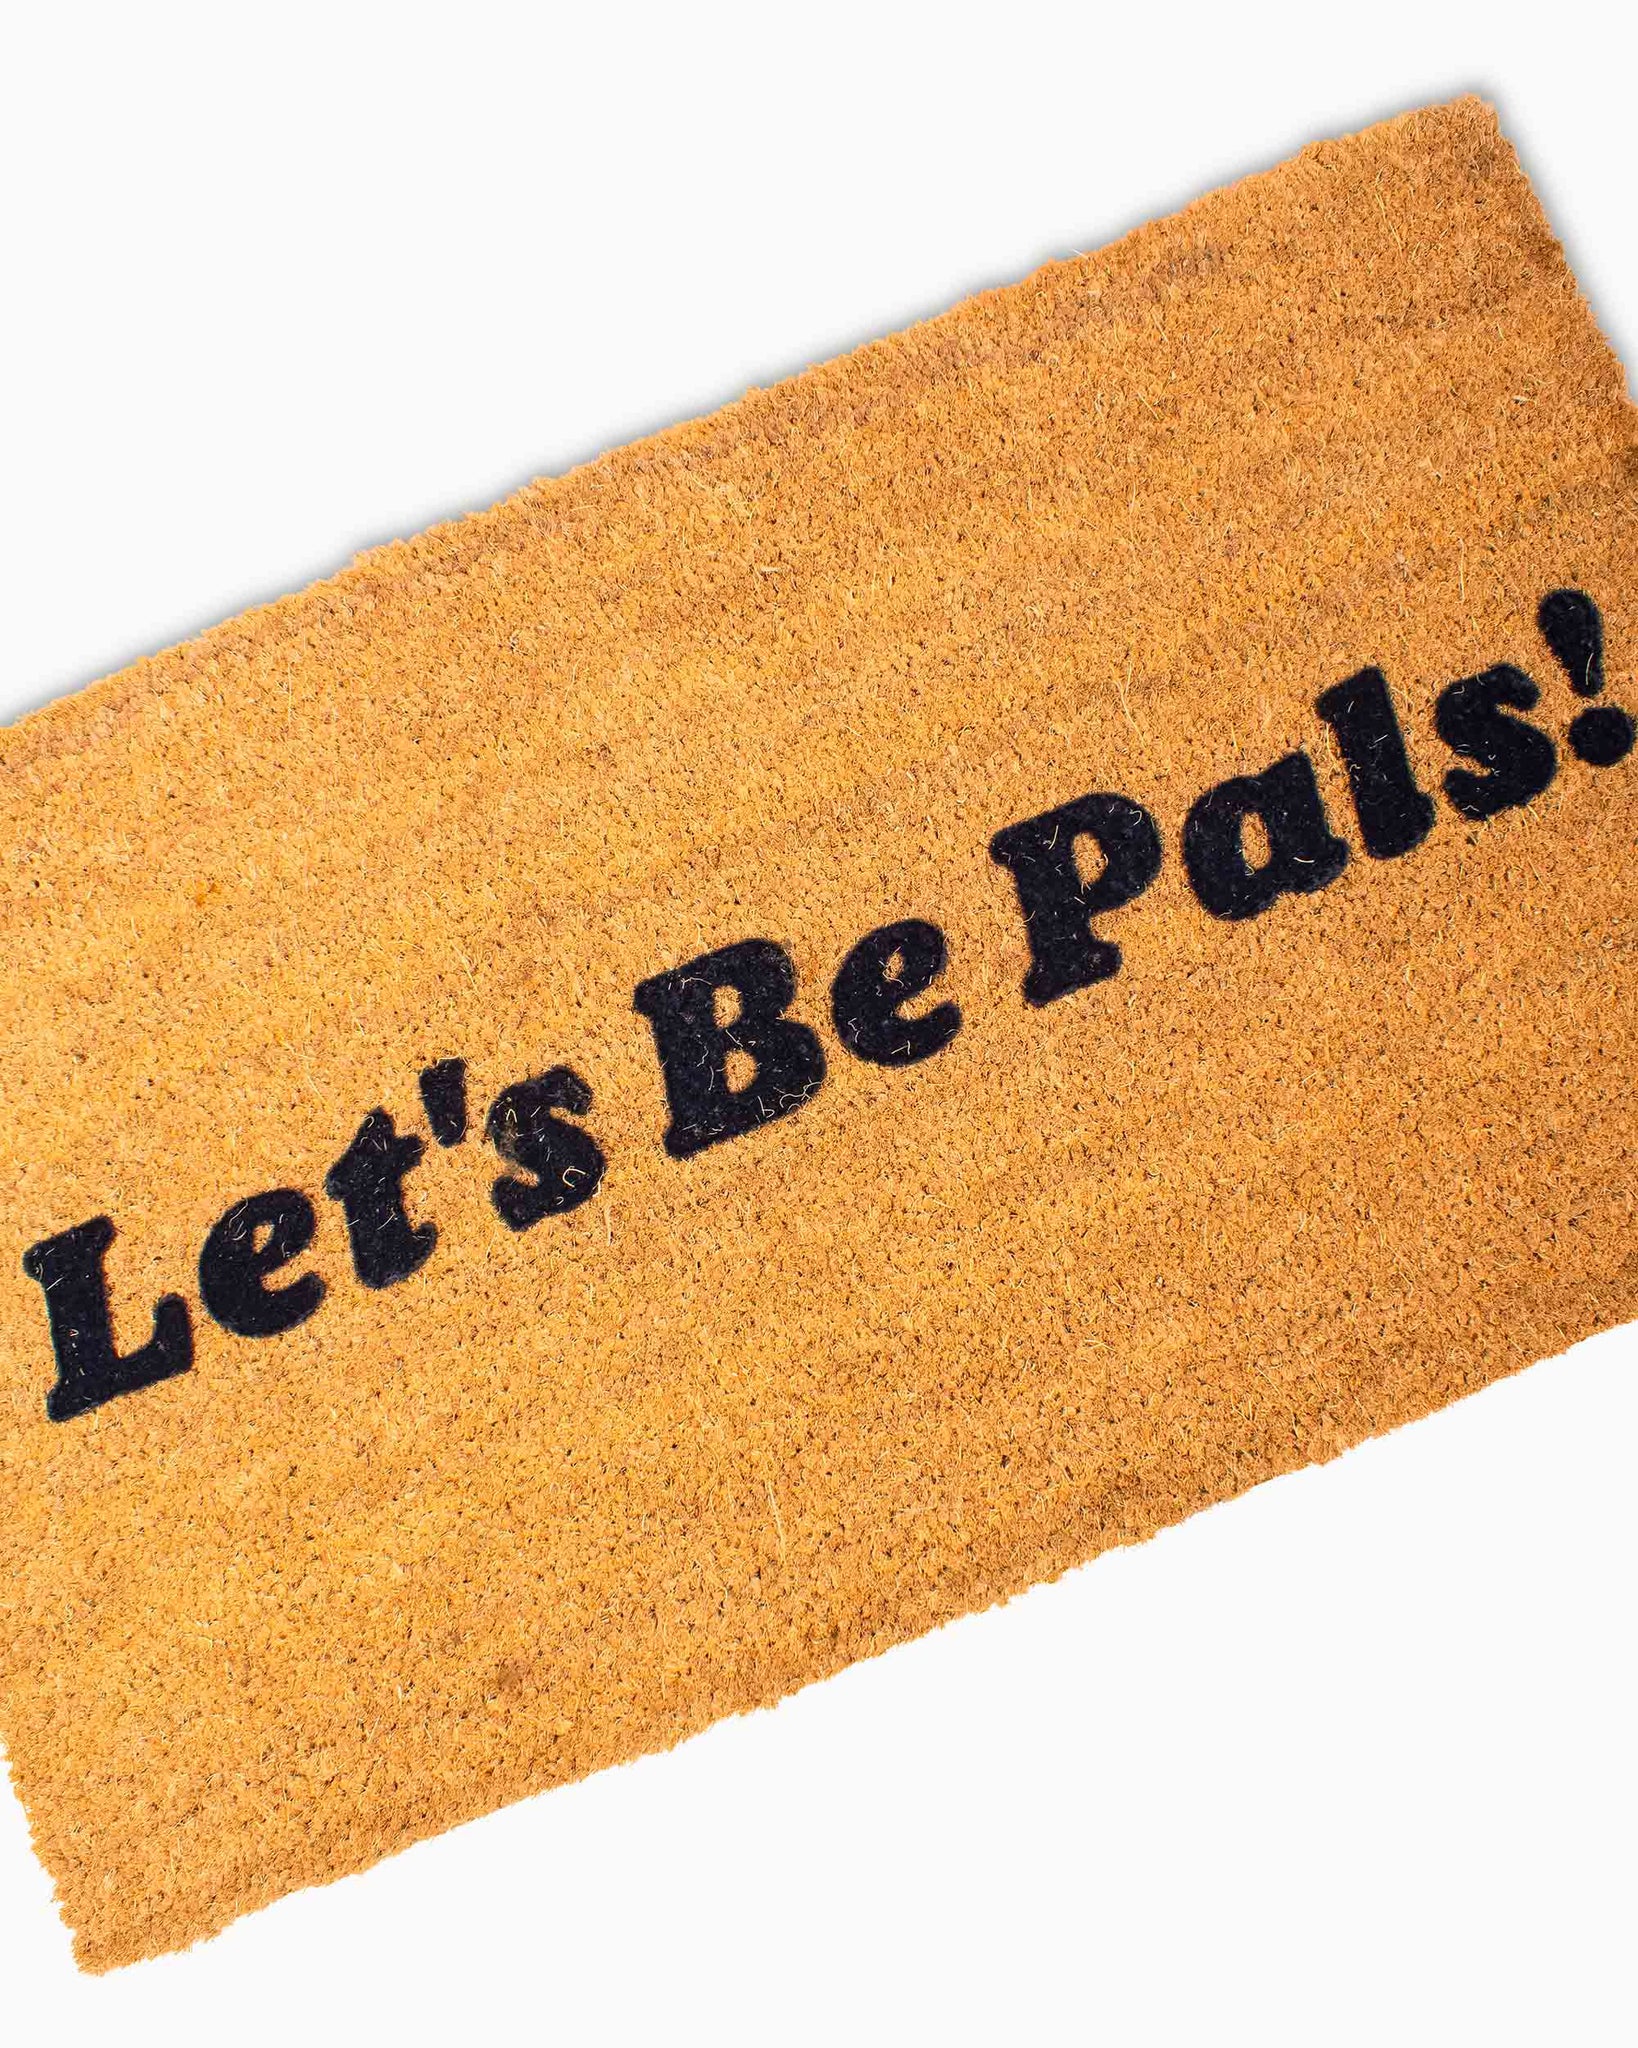 Lost & Found 'Let's Be Pals' Mat